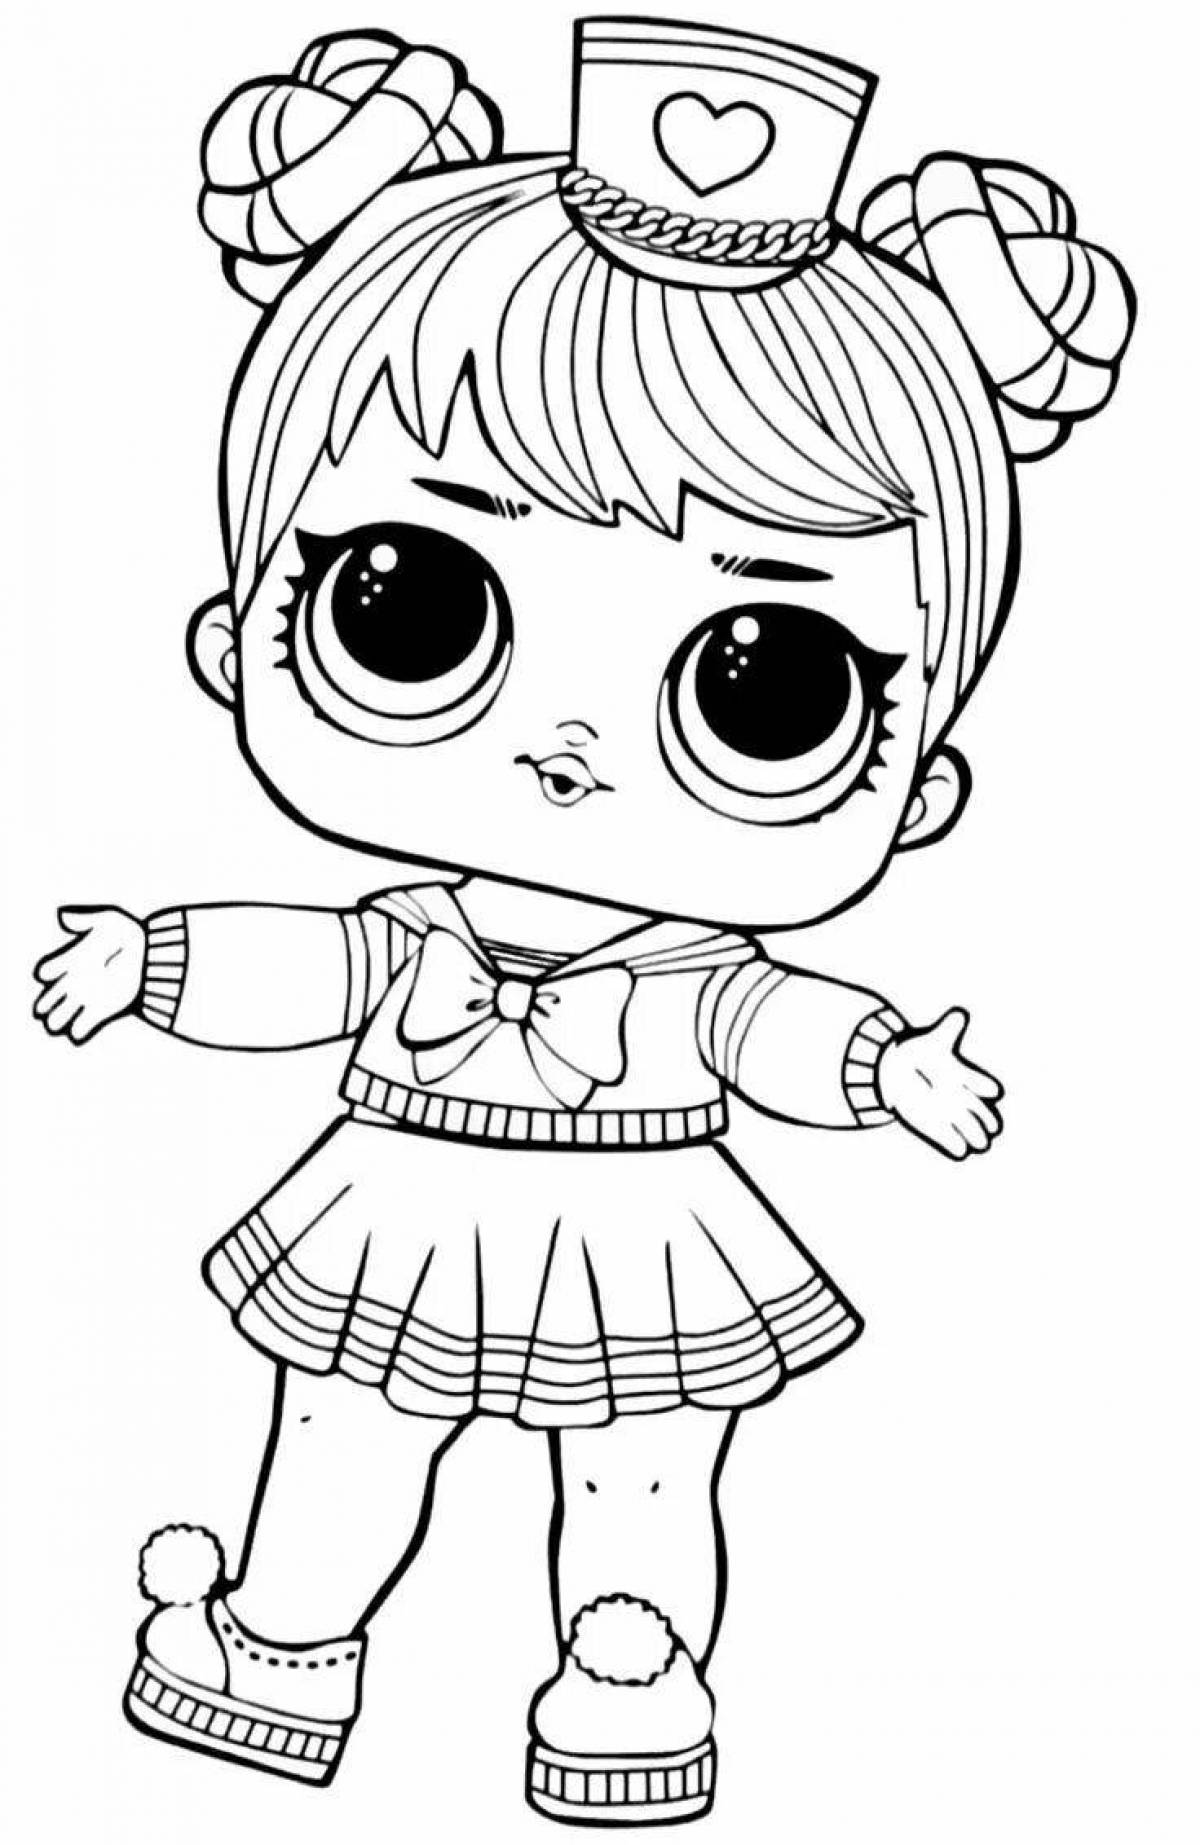 Glorious bee doll lol coloring book